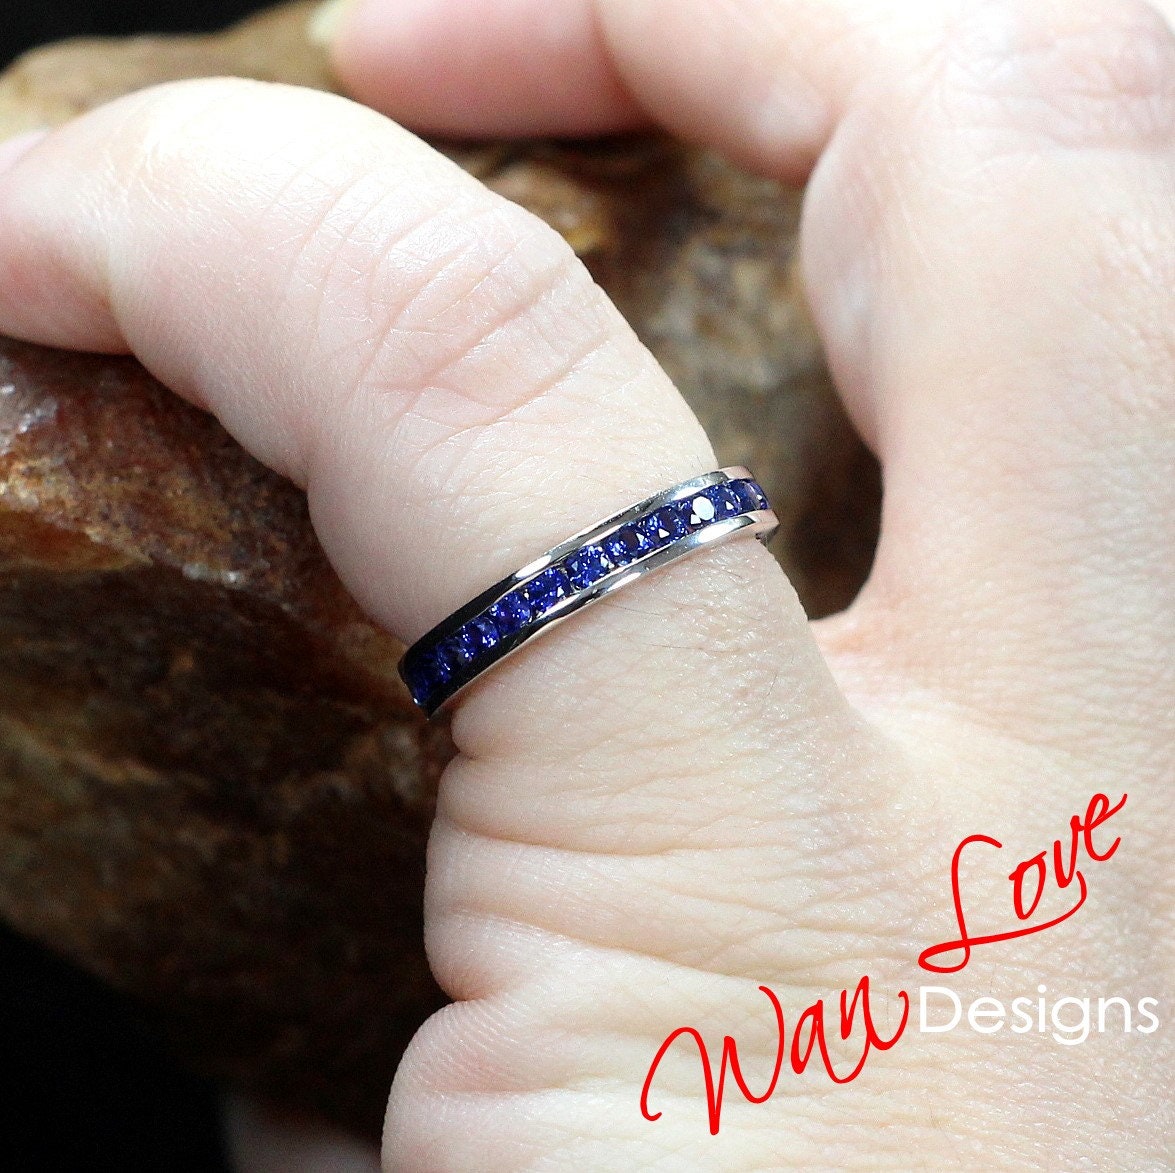 1.8MM Channel Setting Blue Sapphire Wedding Band / Colorless Round Princes Half Eternity Band / 14K White Gold Moissanite Band For Her Wan Love Designs